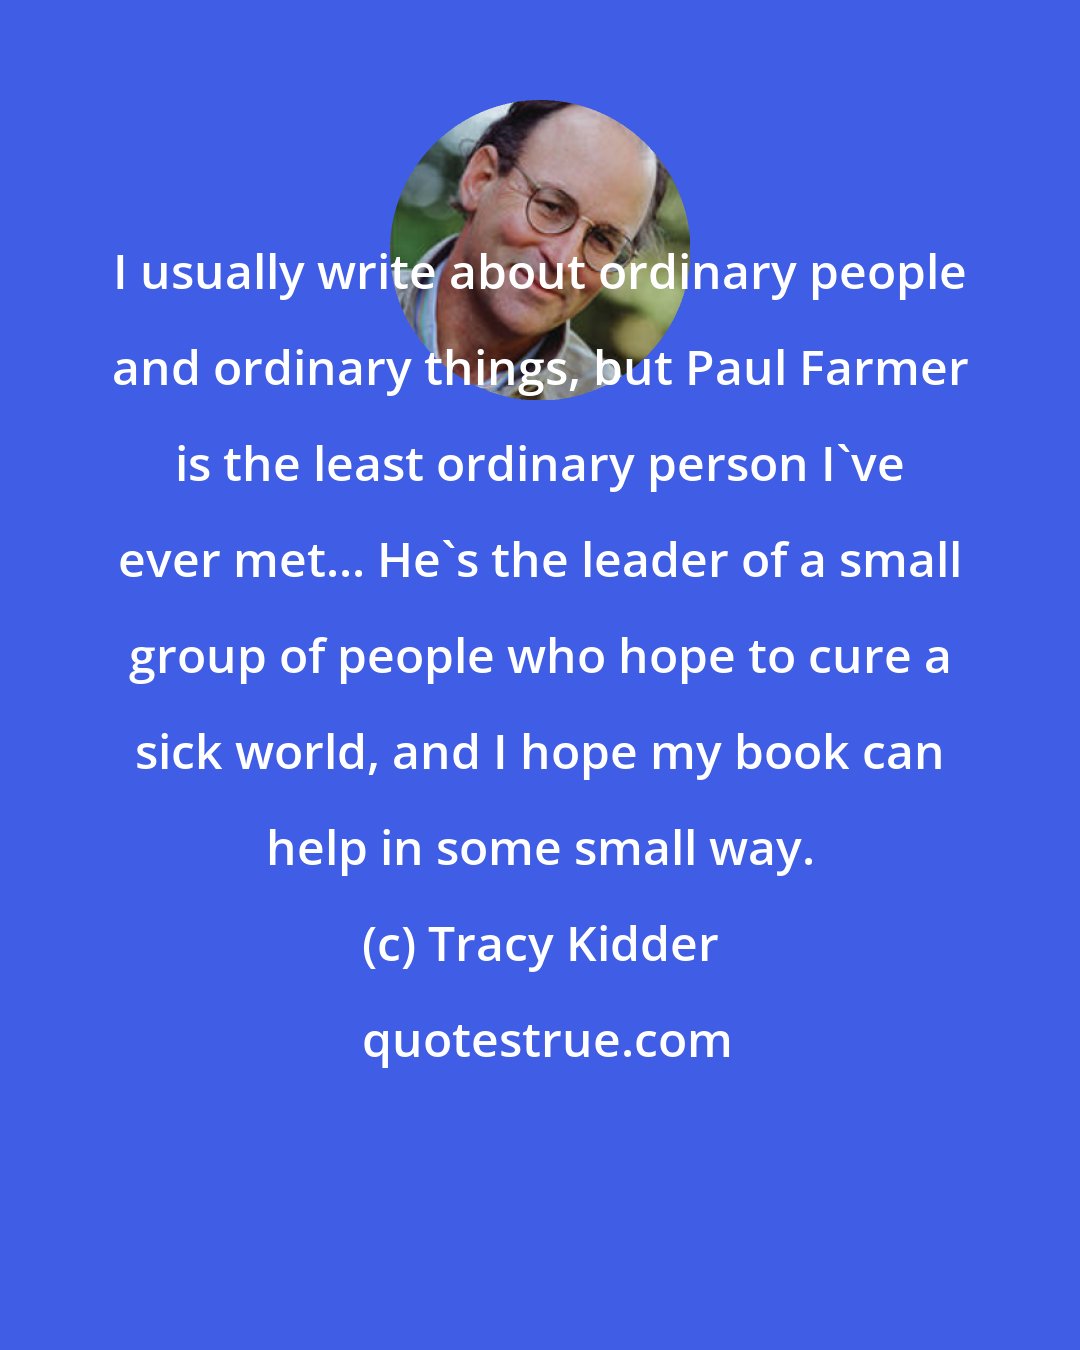 Tracy Kidder: I usually write about ordinary people and ordinary things, but Paul Farmer is the least ordinary person I've ever met... He's the leader of a small group of people who hope to cure a sick world, and I hope my book can help in some small way.